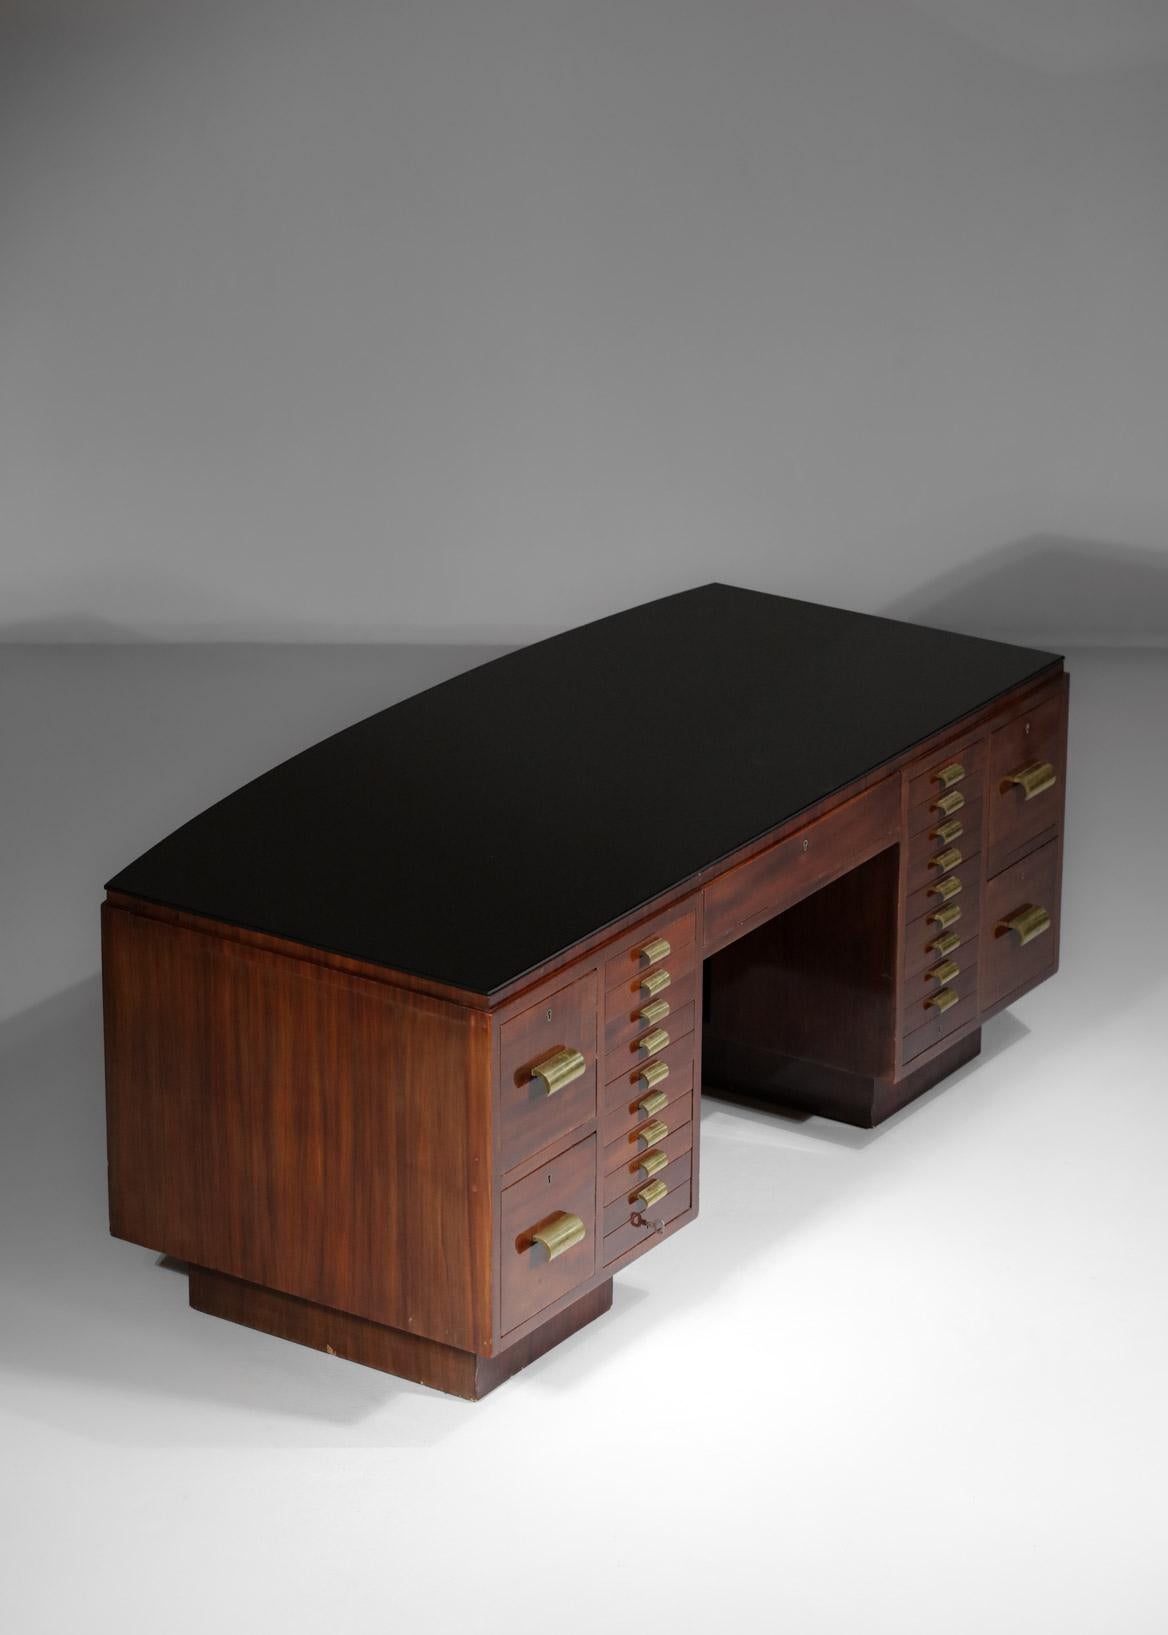 Imposing 1940's French Modernist Desk in Mahogany in Style of Dupré Lafon, E498 In Good Condition For Sale In Lyon, FR